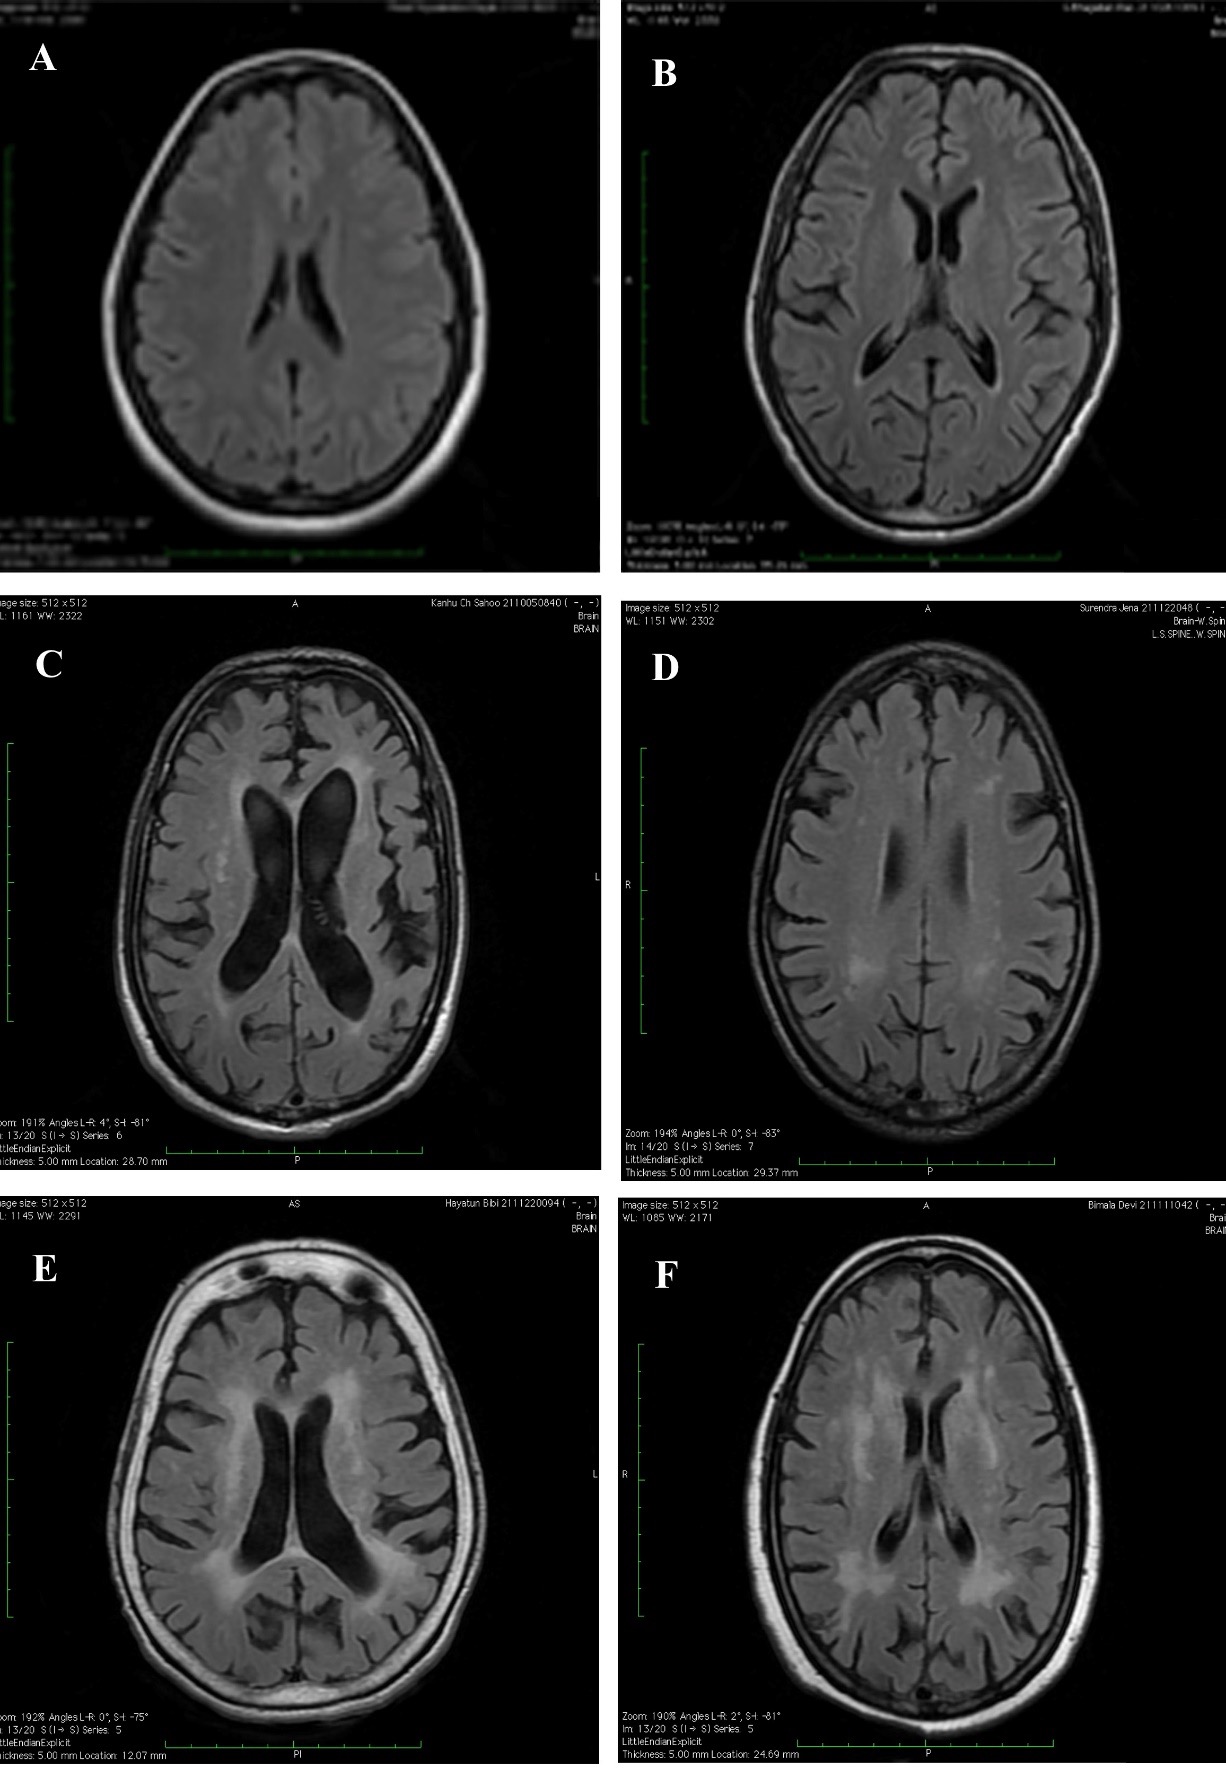 Frontiers  Fully Automatic Classification of Brain Atrophy on NCCT Images  in Cerebral Small Vessel Disease: A Pilot Study Using Deep Learning Models